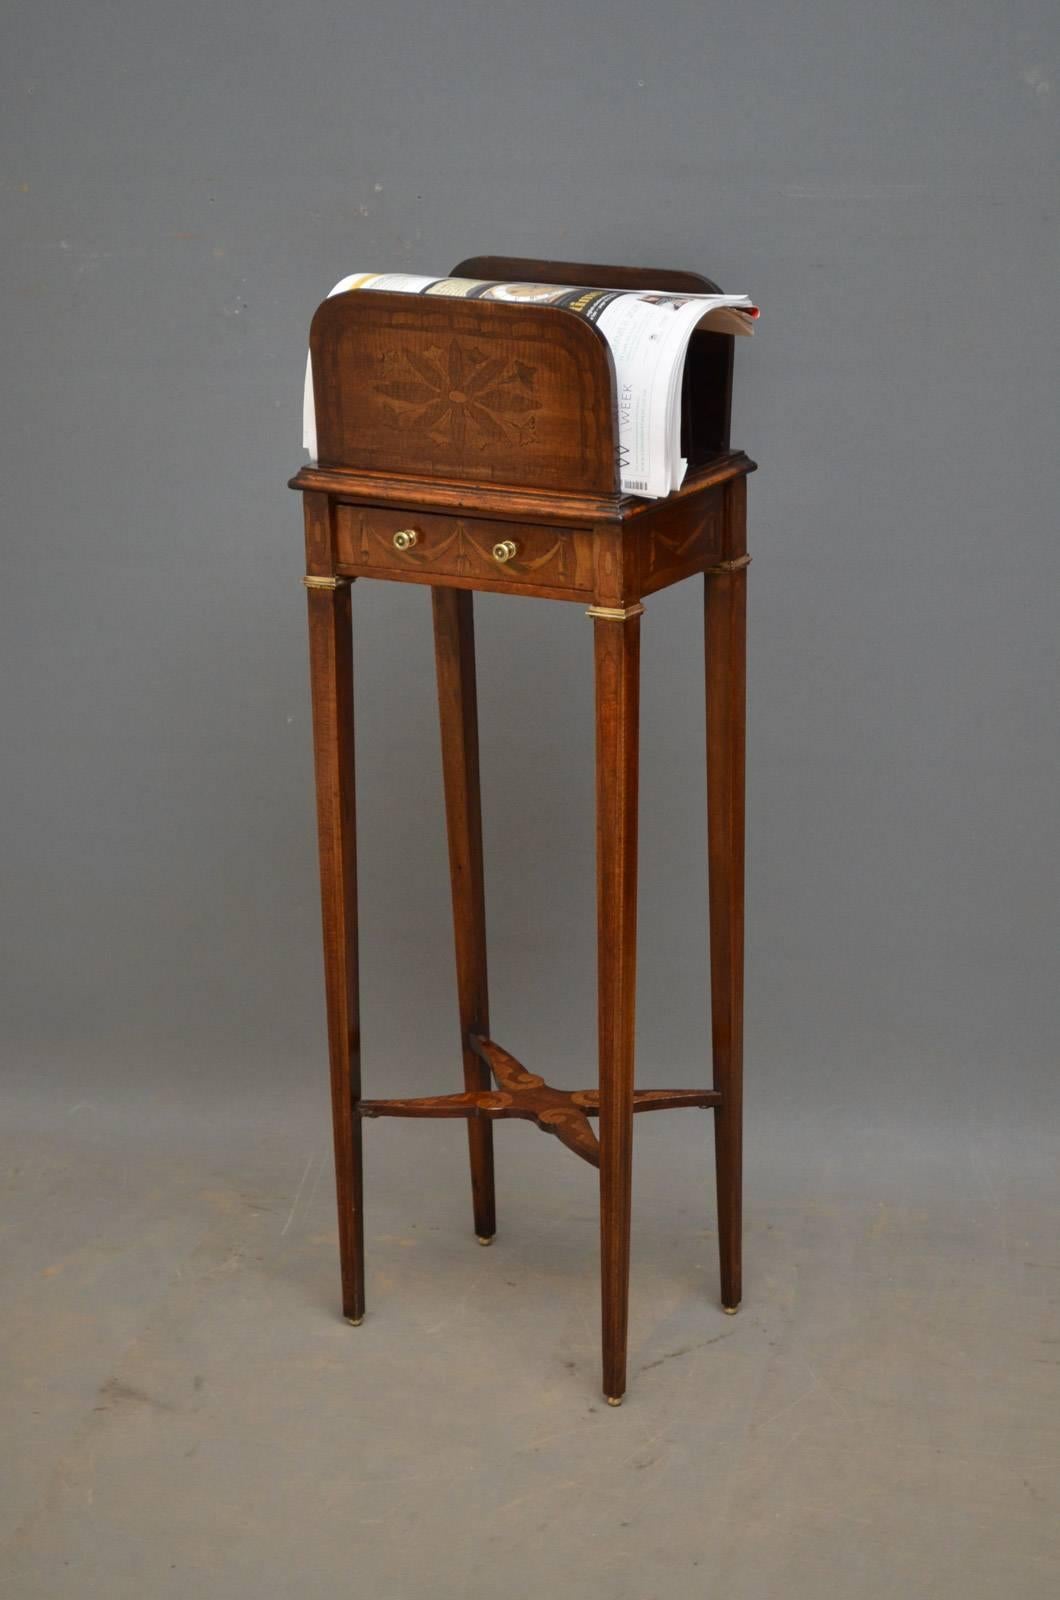 Sn3910, slim and tall Edwardian inlaid magazine rack with four commentators and inlaid drawer with original brass handles, all standing on slender legs terminating in brass ball feet, all in original, home ready condition, circa 1900
Measures: H